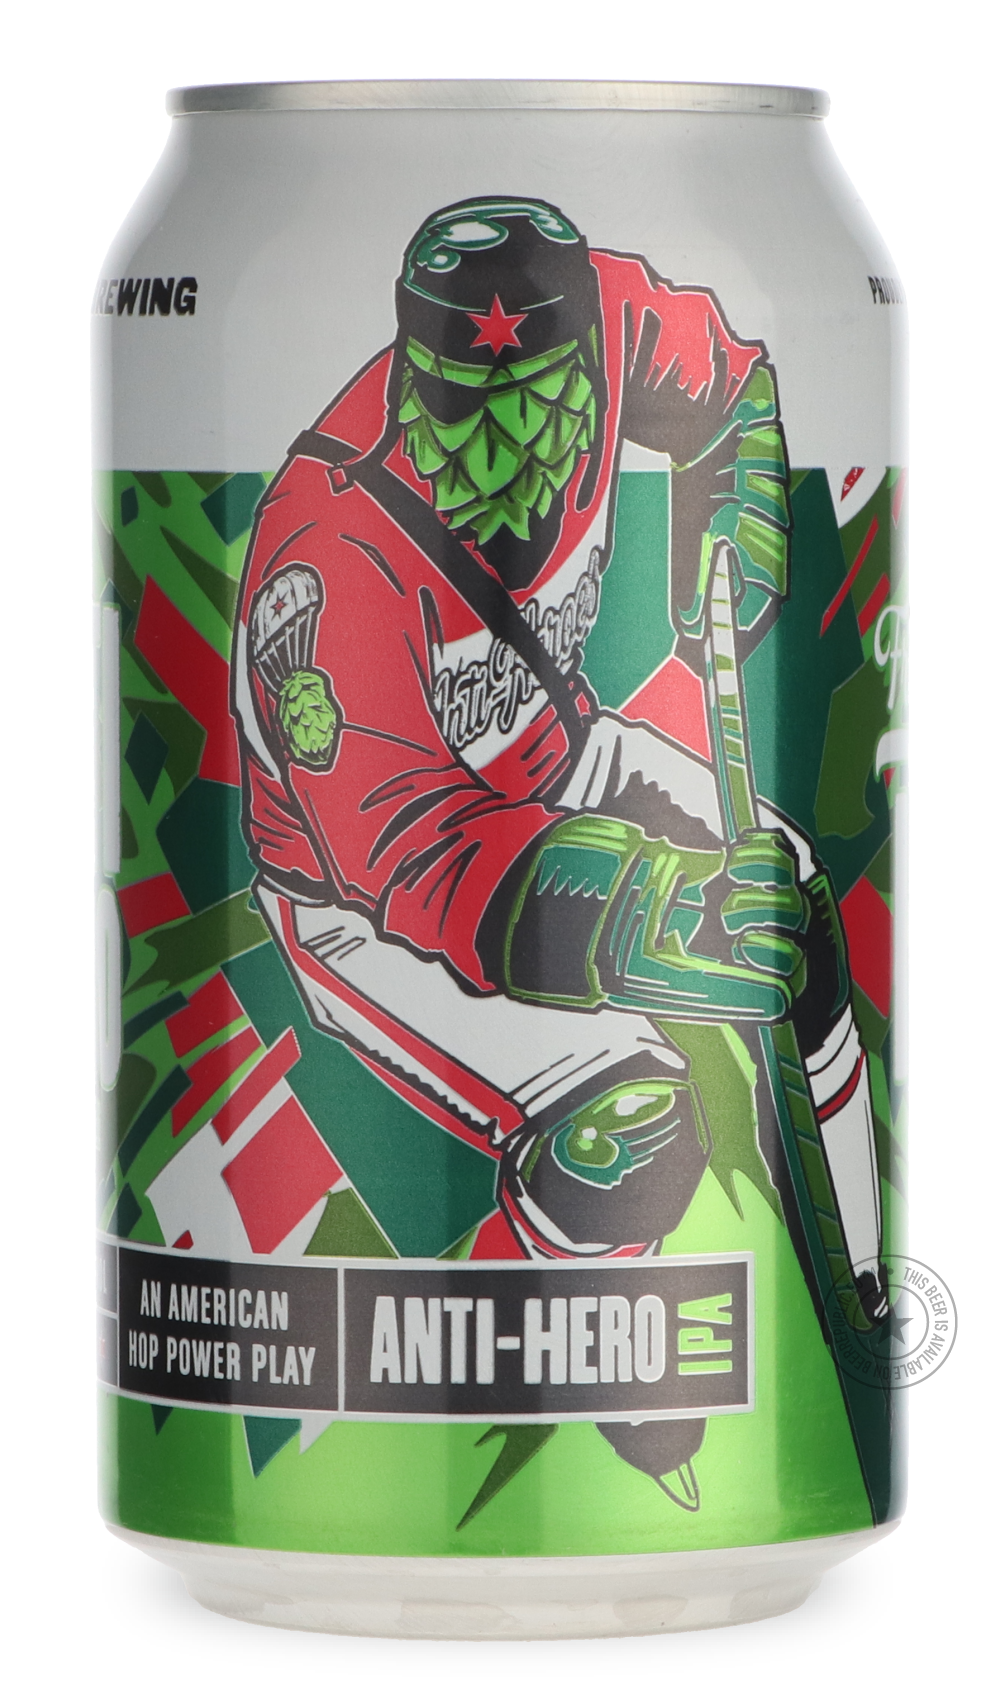 -Revolution- Anti-Hero-IPA- Only @ Beer Republic - The best online beer store for American & Canadian craft beer - Buy beer online from the USA and Canada - Bier online kopen - Amerikaans bier kopen - Craft beer store - Craft beer kopen - Amerikanisch bier kaufen - Bier online kaufen - Acheter biere online - IPA - Stout - Porter - New England IPA - Hazy IPA - Imperial Stout - Barrel Aged - Barrel Aged Imperial Stout - Brown - Dark beer - Blond - Blonde - Pilsner - Lager - Wheat - Weizen - Amber - Barley Win